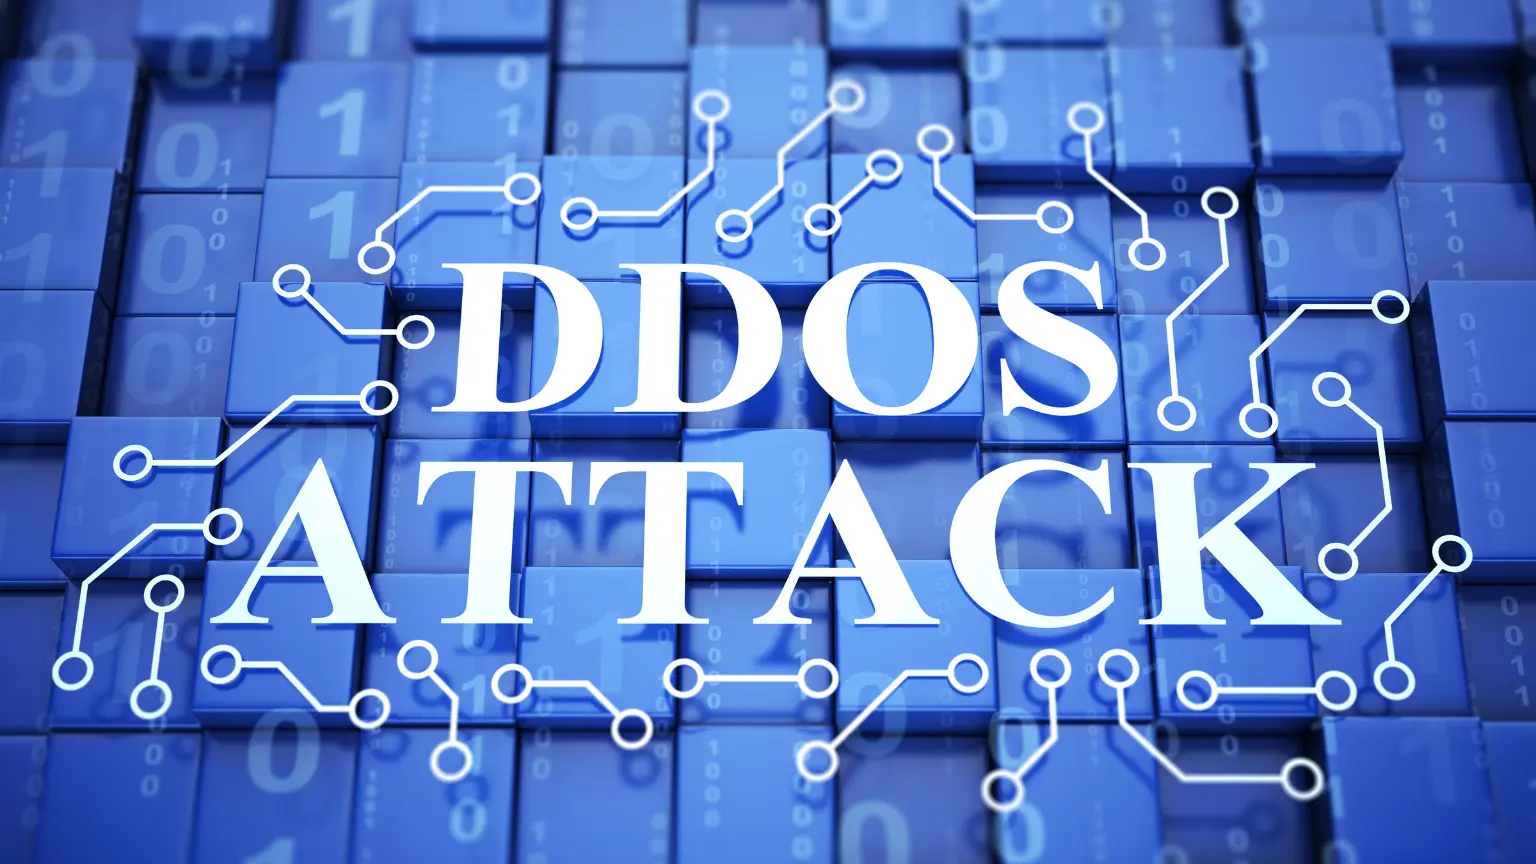 how to mitigate ddos attack